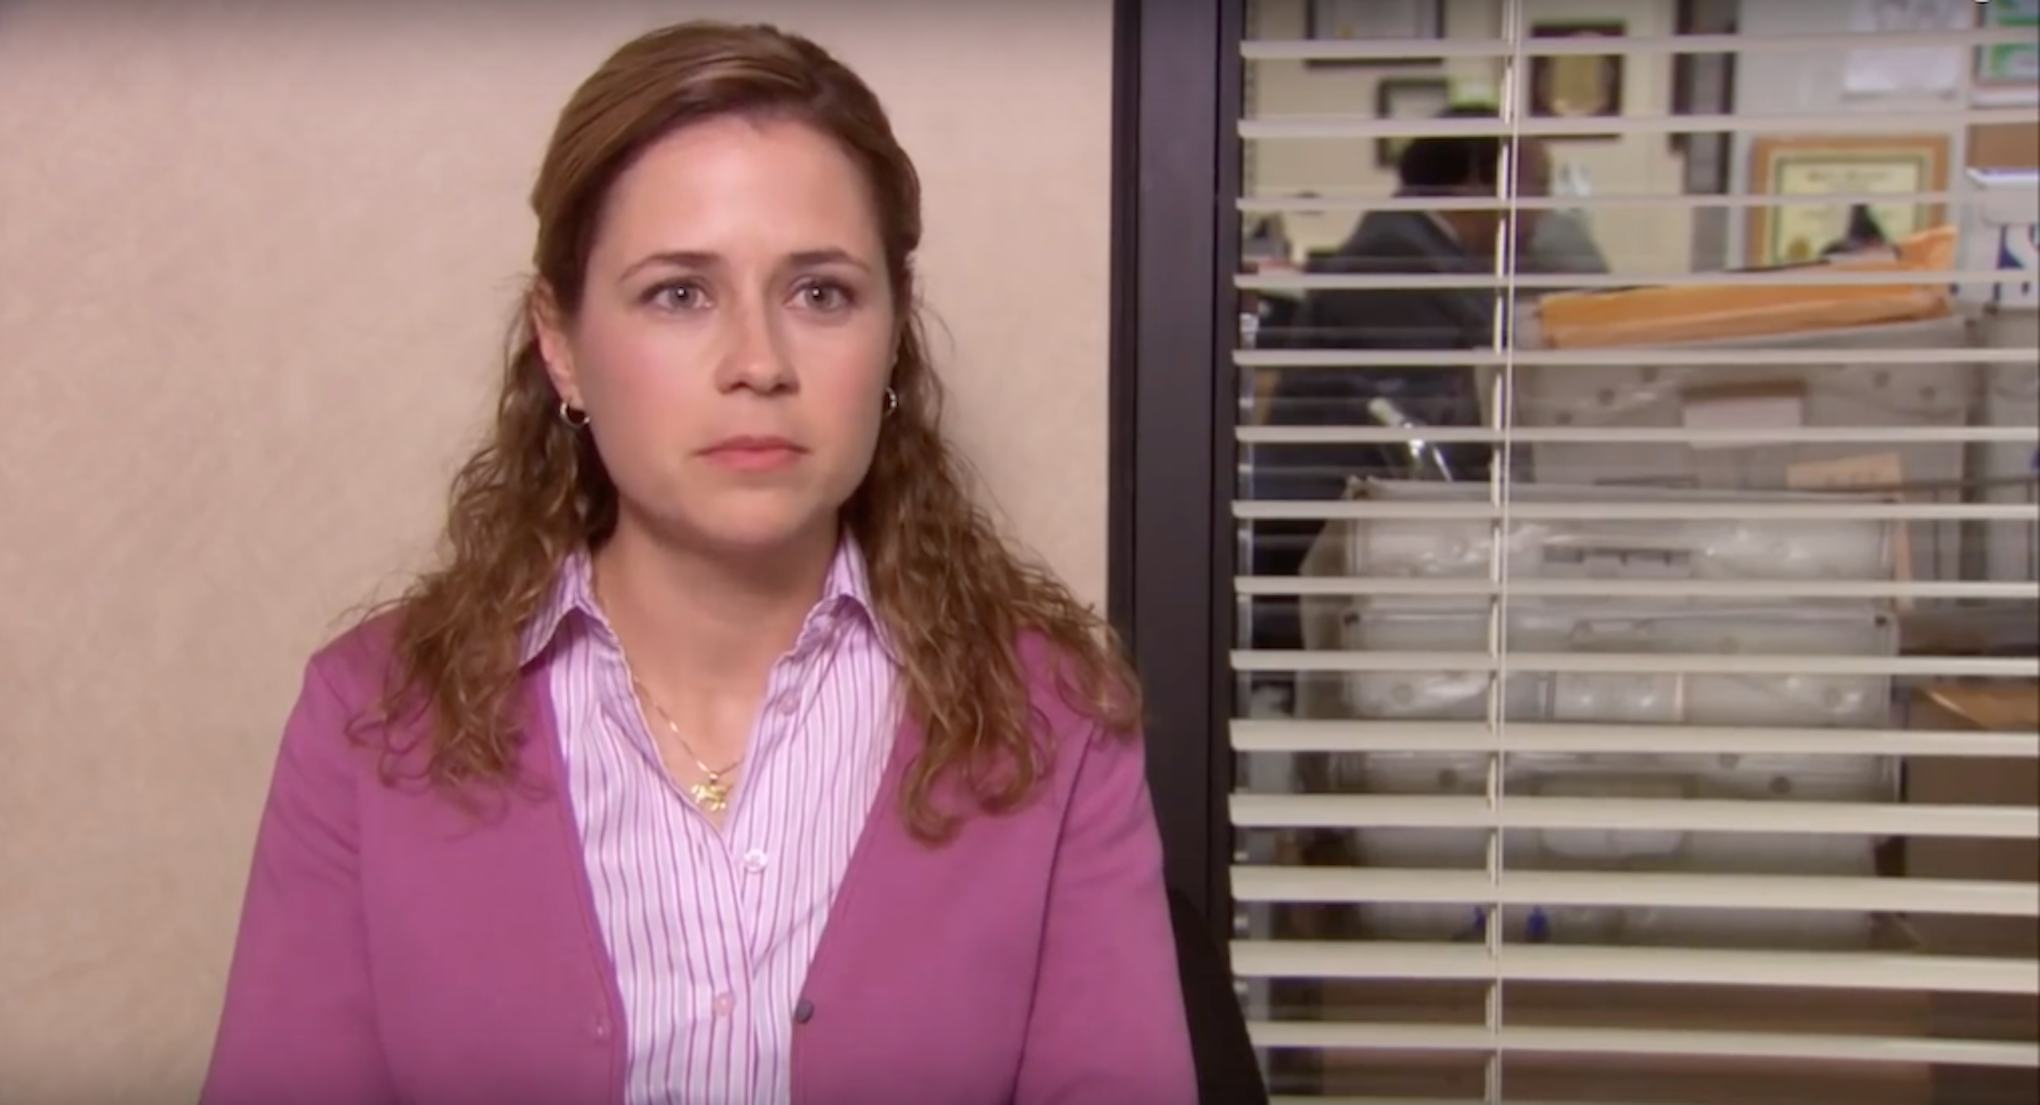 5 Things You Have In Common With Pam From The Office That Are Totally 